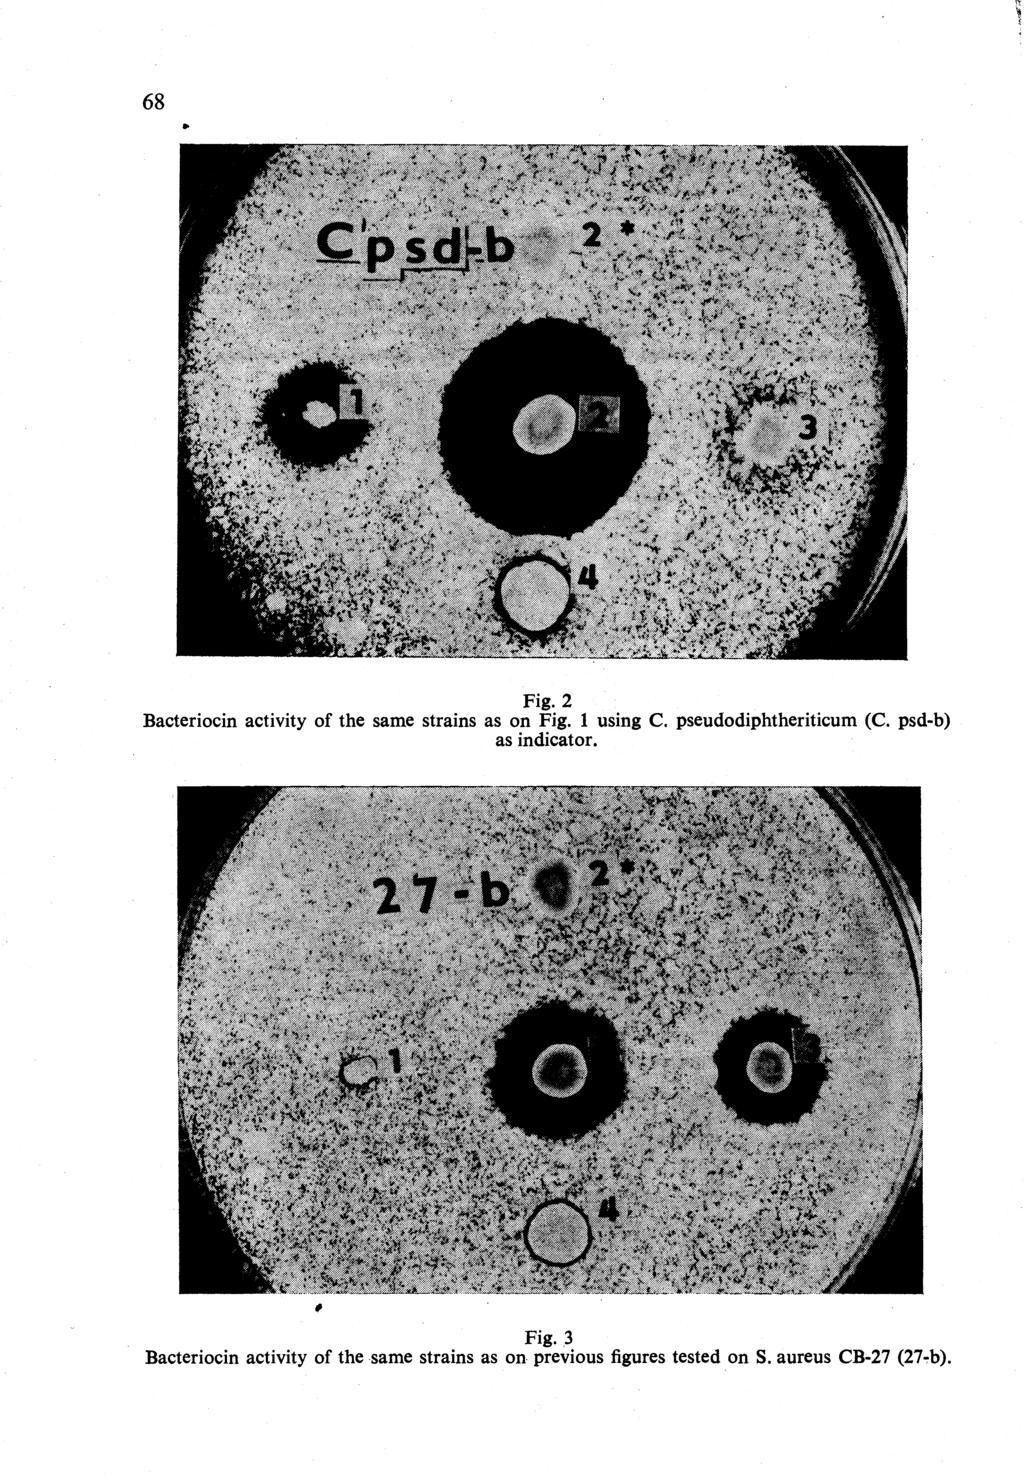 68 Fig. 2 Bacteriocin activity of the same strains as on Fig. 1 using C. pseudodiphtheriticum (C.